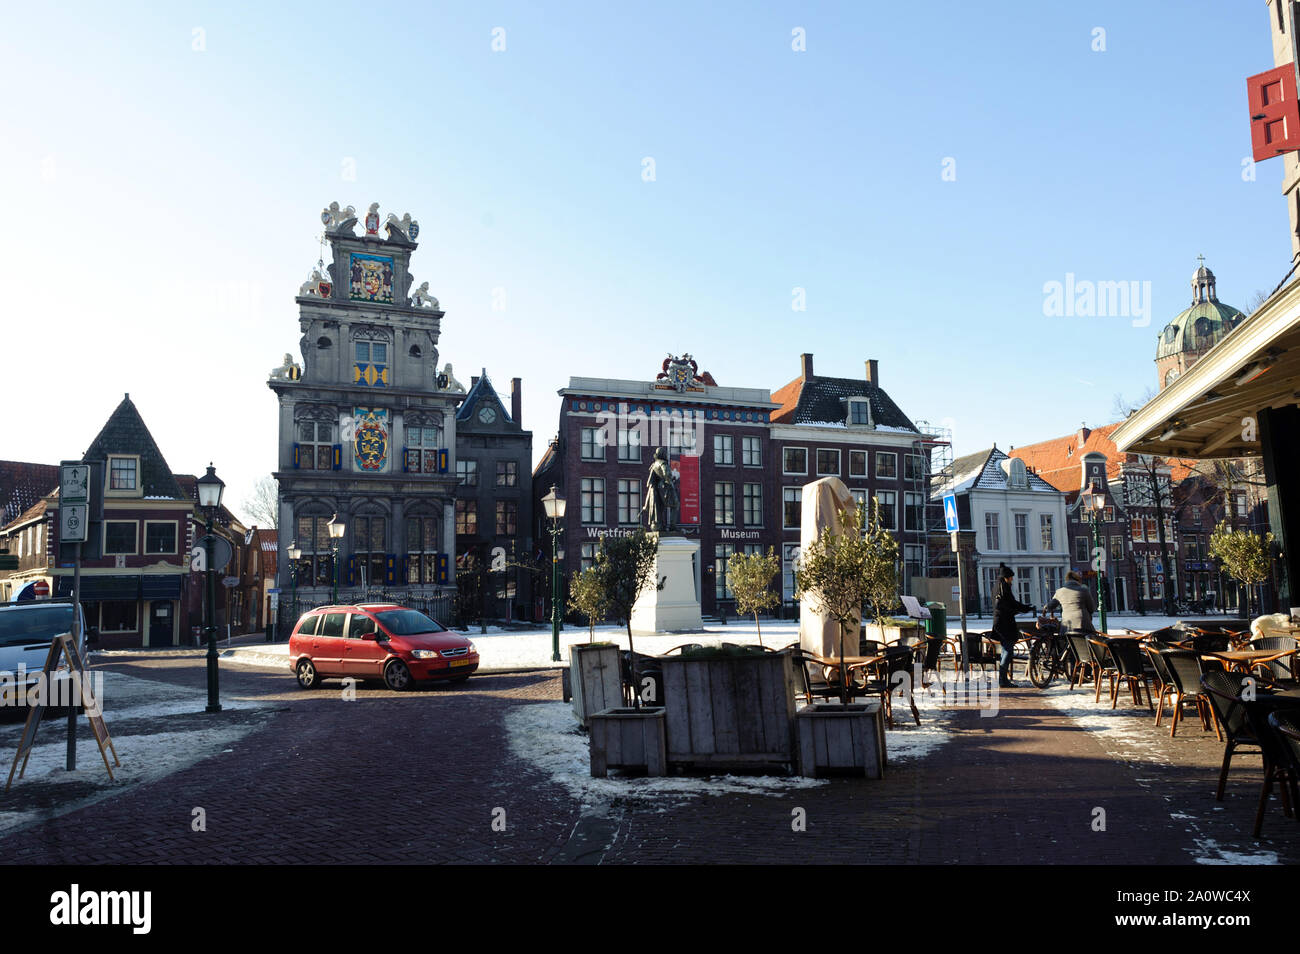 Hoorn, North Holland / Netherlands - March 11, 2012: Snow on streets of Hoorn city. Old town at sunny winter day. Stock Photo